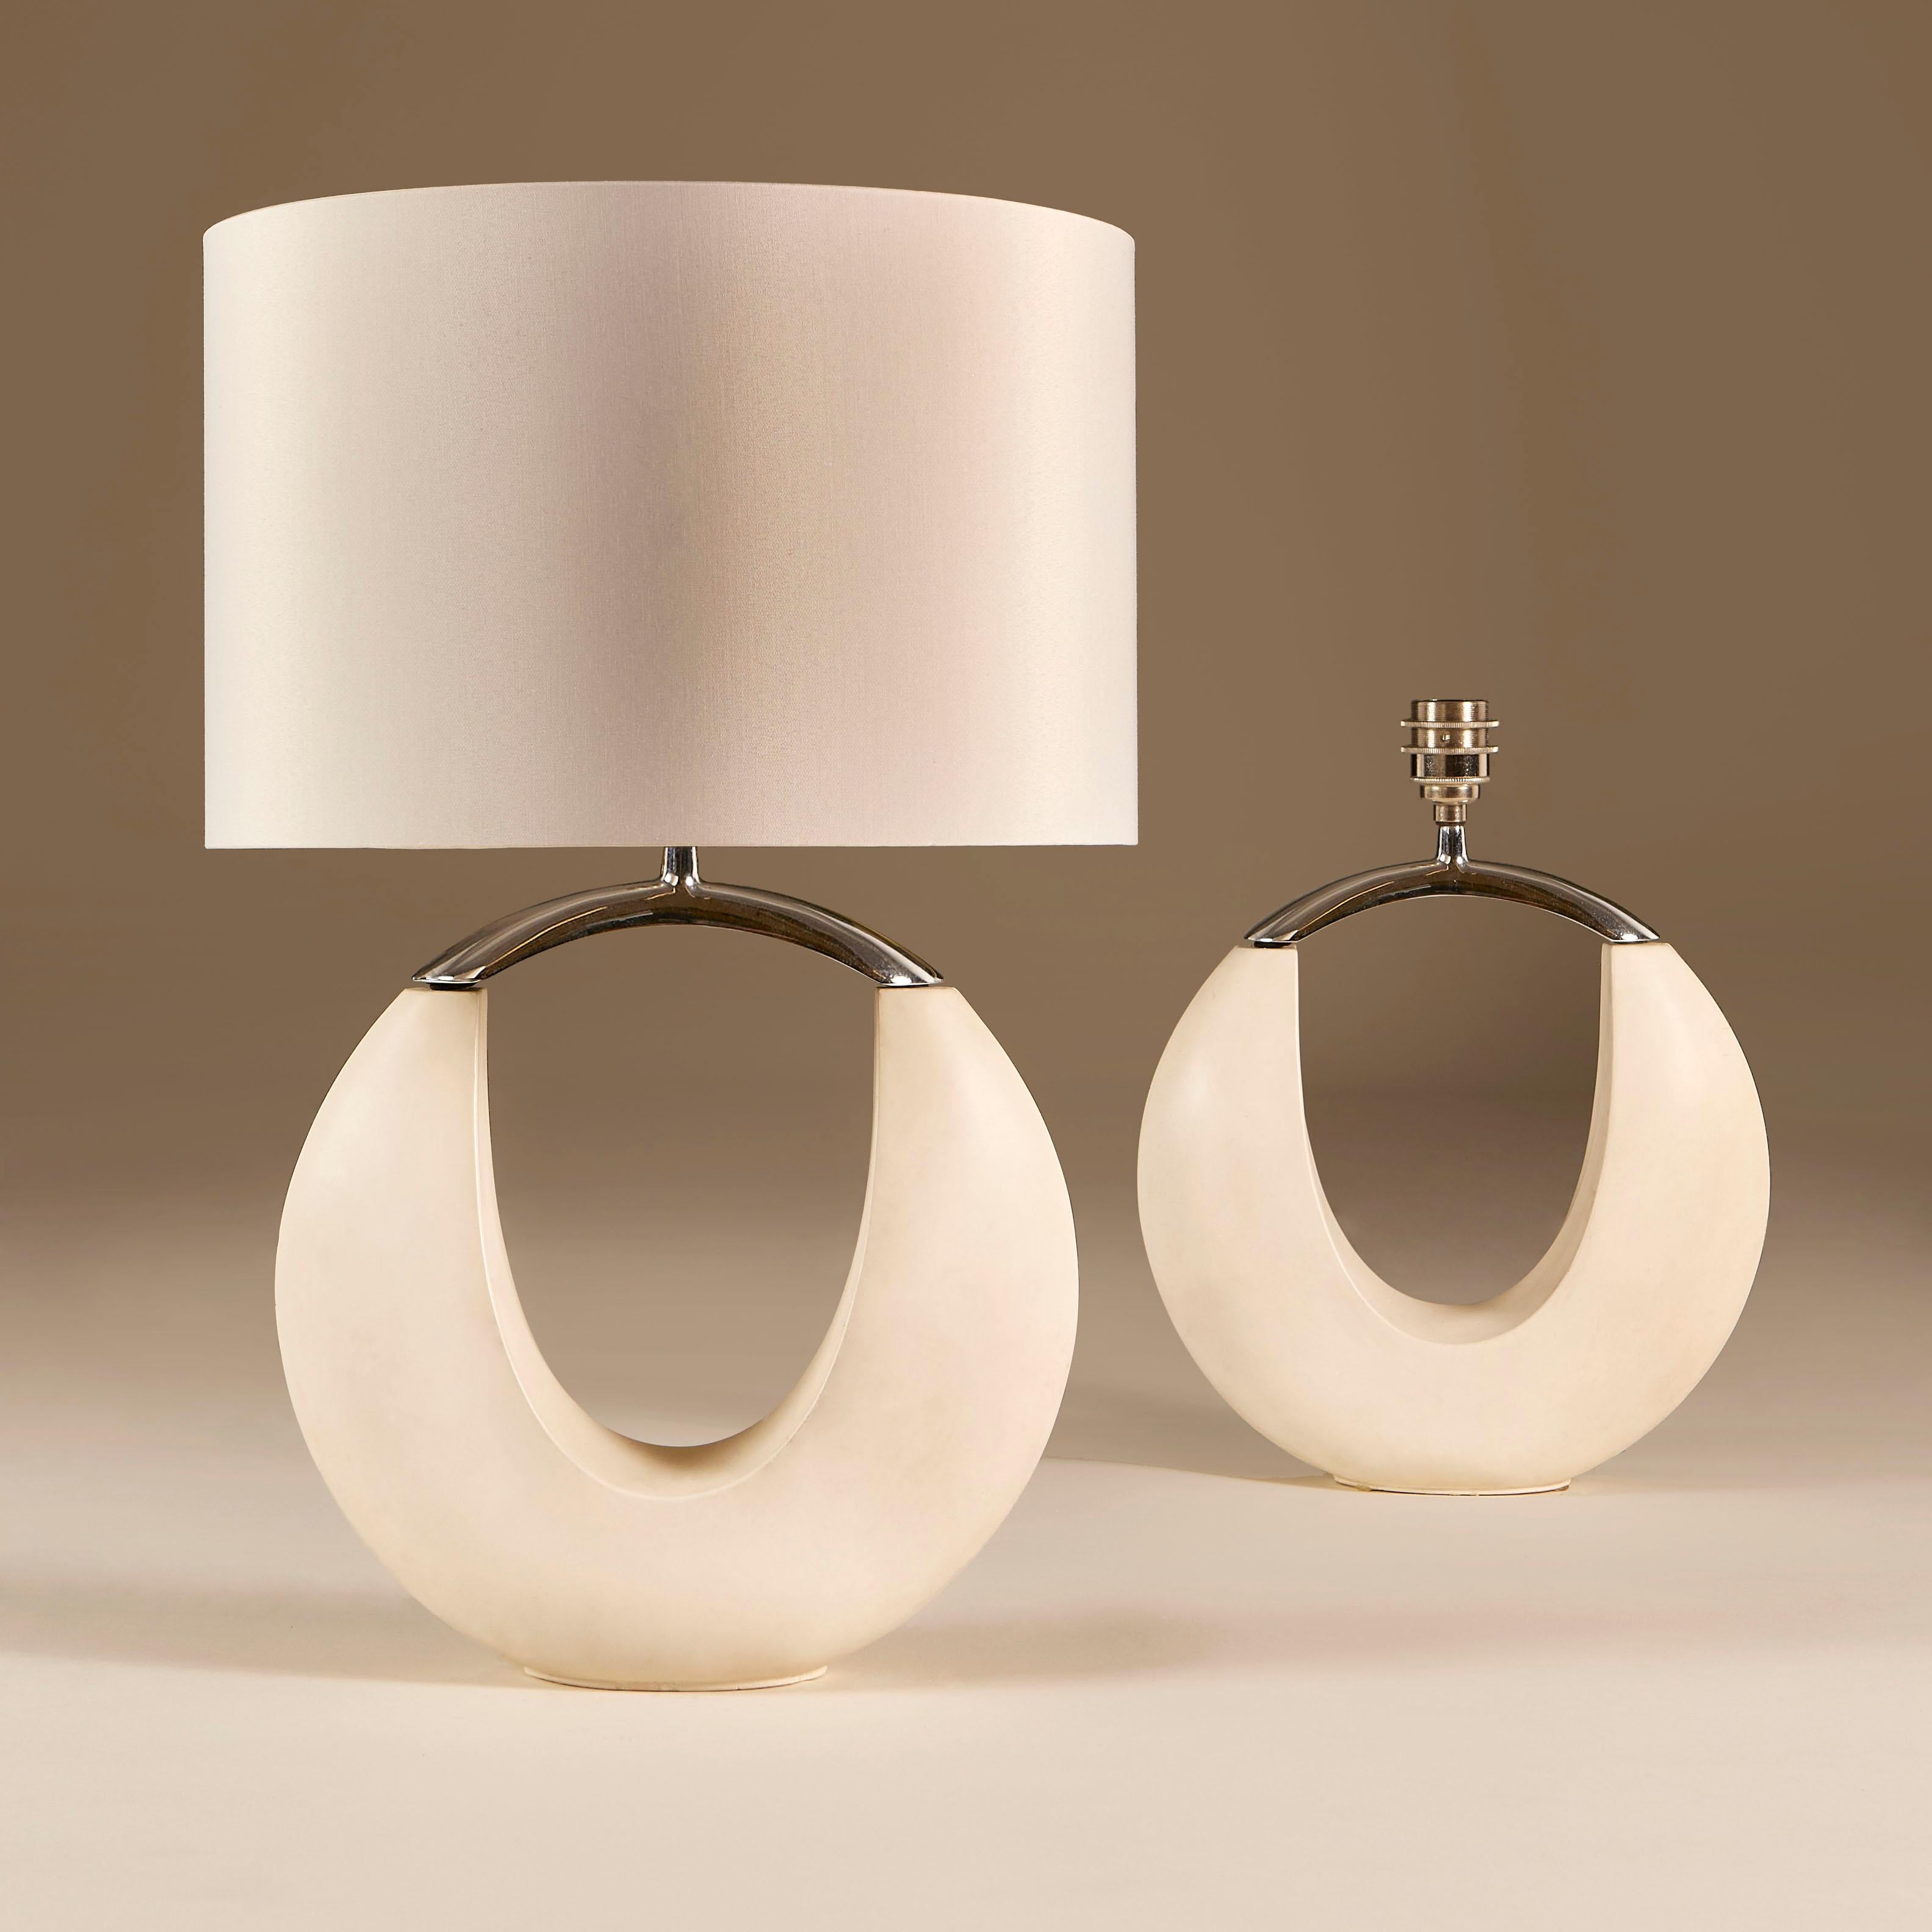 Smooth scultupural cream stone shaped lamps with chrome top.
